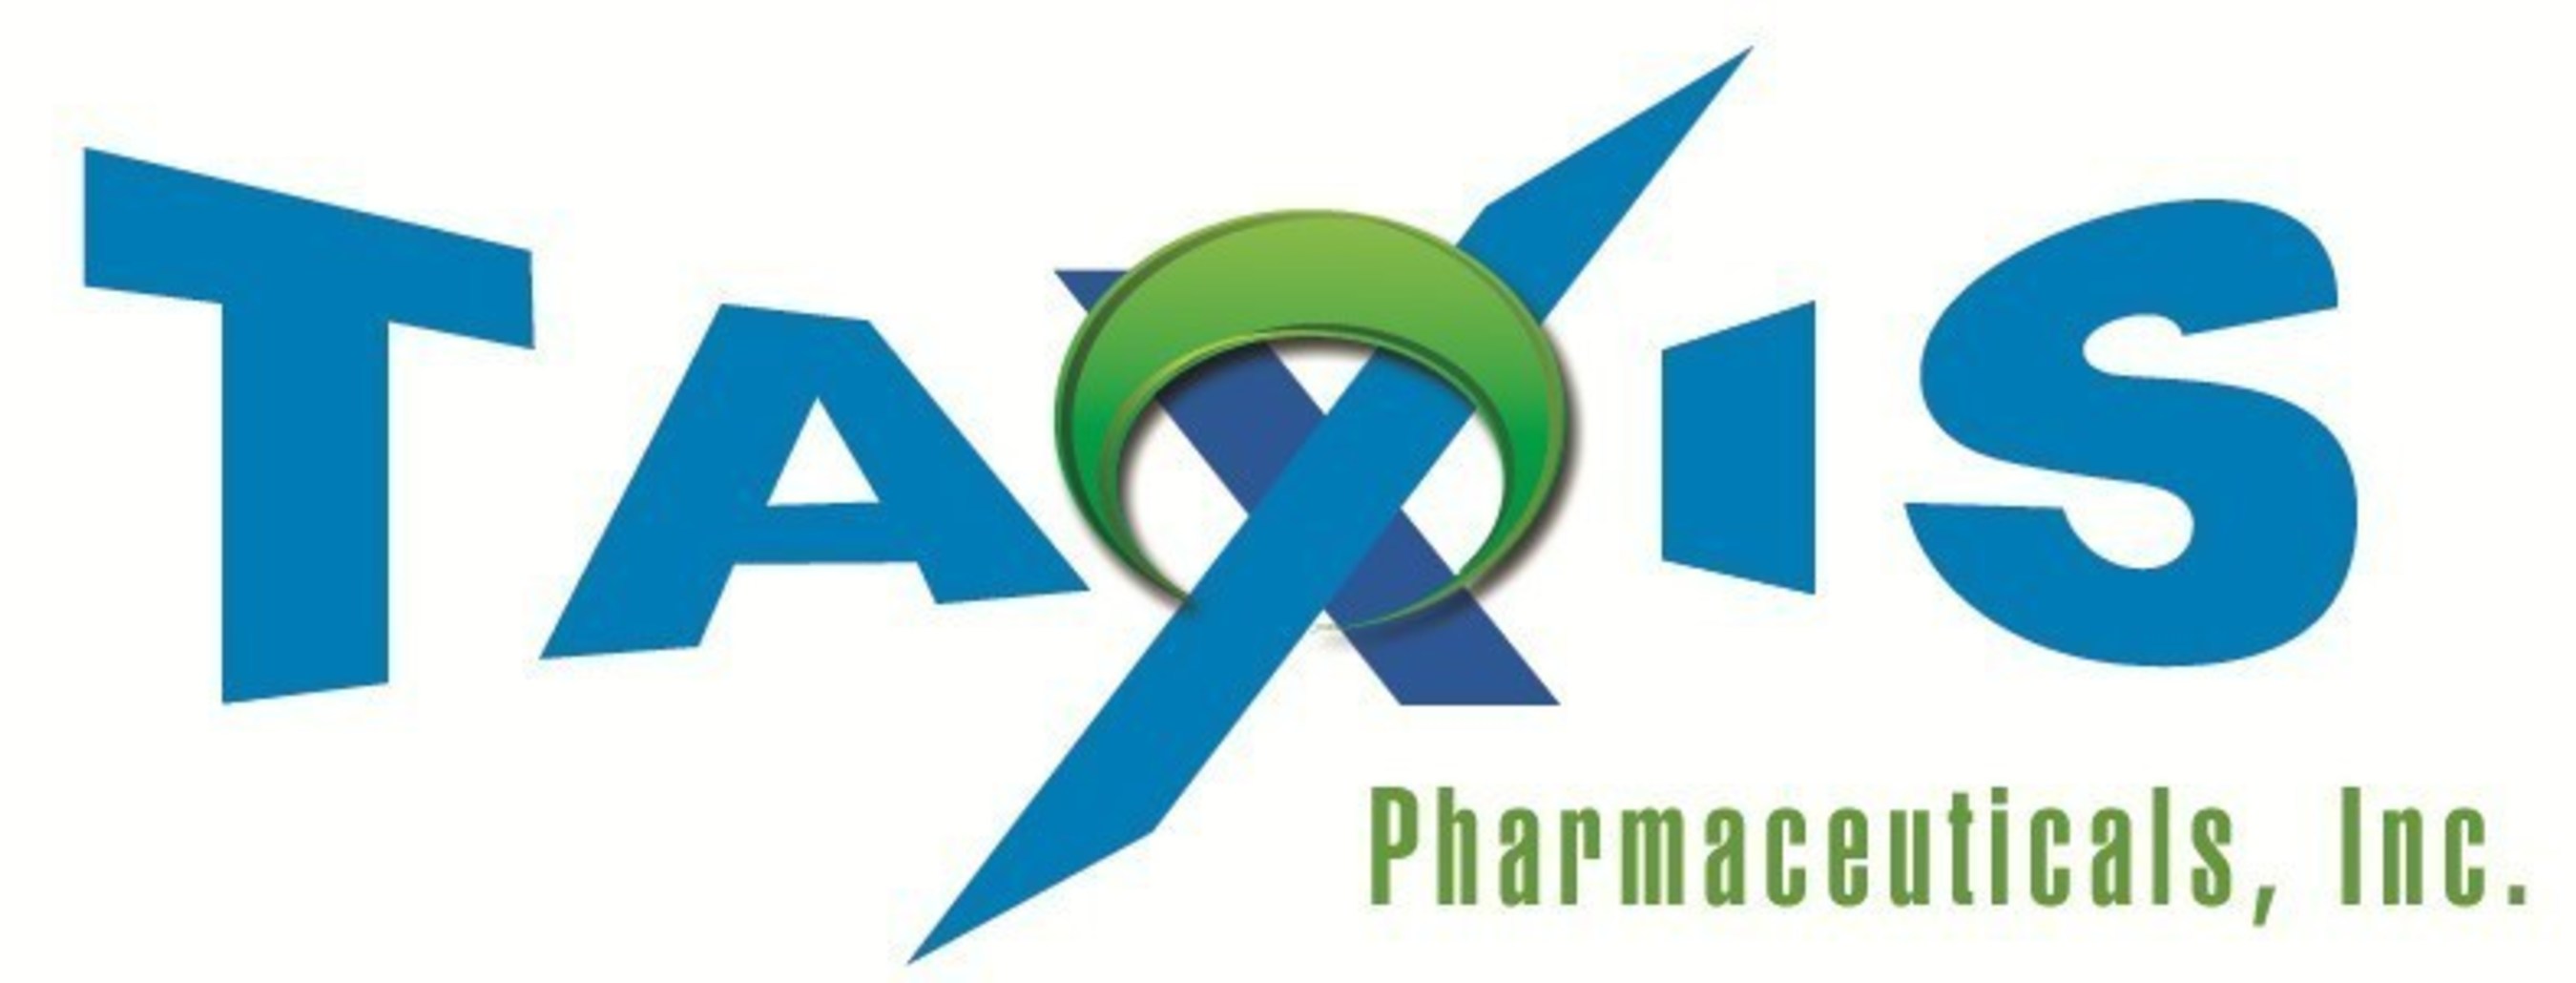 TAXIS Pharmaceuticals is dedicated to developing novel antibiotics to combat the growing threat of multidrug-resistant bacteria.